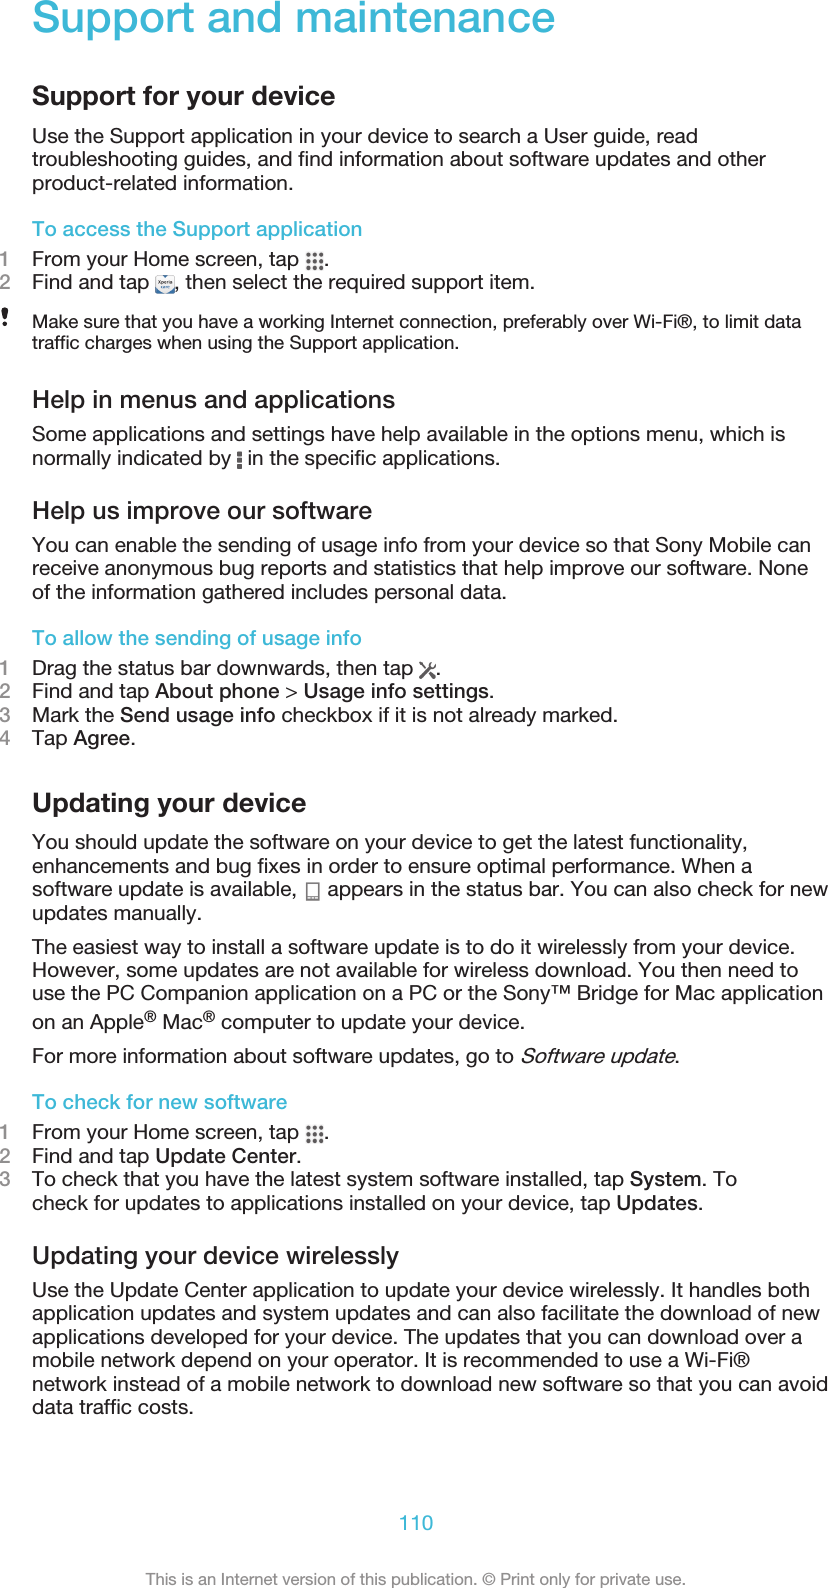 Support and maintenanceSupport for your deviceUse the Support application in your device to search a User guide, readtroubleshooting guides, and find information about software updates and otherproduct-related information.To access the Support application1From your Home screen, tap  .2Find and tap  , then select the required support item.Make sure that you have a working Internet connection, preferably over Wi-Fi®, to limit datatraffic charges when using the Support application.Help in menus and applicationsSome applications and settings have help available in the options menu, which isnormally indicated by   in the specific applications.Help us improve our softwareYou can enable the sending of usage info from your device so that Sony Mobile canreceive anonymous bug reports and statistics that help improve our software. Noneof the information gathered includes personal data.To allow the sending of usage info1Drag the status bar downwards, then tap  .2Find and tap About phone &gt; Usage info settings.3Mark the Send usage info checkbox if it is not already marked.4Tap Agree.Updating your deviceYou should update the software on your device to get the latest functionality,enhancements and bug fixes in order to ensure optimal performance. When asoftware update is available,   appears in the status bar. You can also check for newupdates manually.The easiest way to install a software update is to do it wirelessly from your device.However, some updates are not available for wireless download. You then need touse the PC Companion application on a PC or the Sony™ Bridge for Mac applicationon an Apple® Mac® computer to update your device.For more information about software updates, go to Software update.To check for new software1From your Home screen, tap  .2Find and tap Update Center.3To check that you have the latest system software installed, tap System. Tocheck for updates to applications installed on your device, tap Updates.Updating your device wirelesslyUse the Update Center application to update your device wirelessly. It handles bothapplication updates and system updates and can also facilitate the download of newapplications developed for your device. The updates that you can download over amobile network depend on your operator. It is recommended to use a Wi-Fi®network instead of a mobile network to download new software so that you can avoiddata traffic costs.110This is an Internet version of this publication. © Print only for private use.